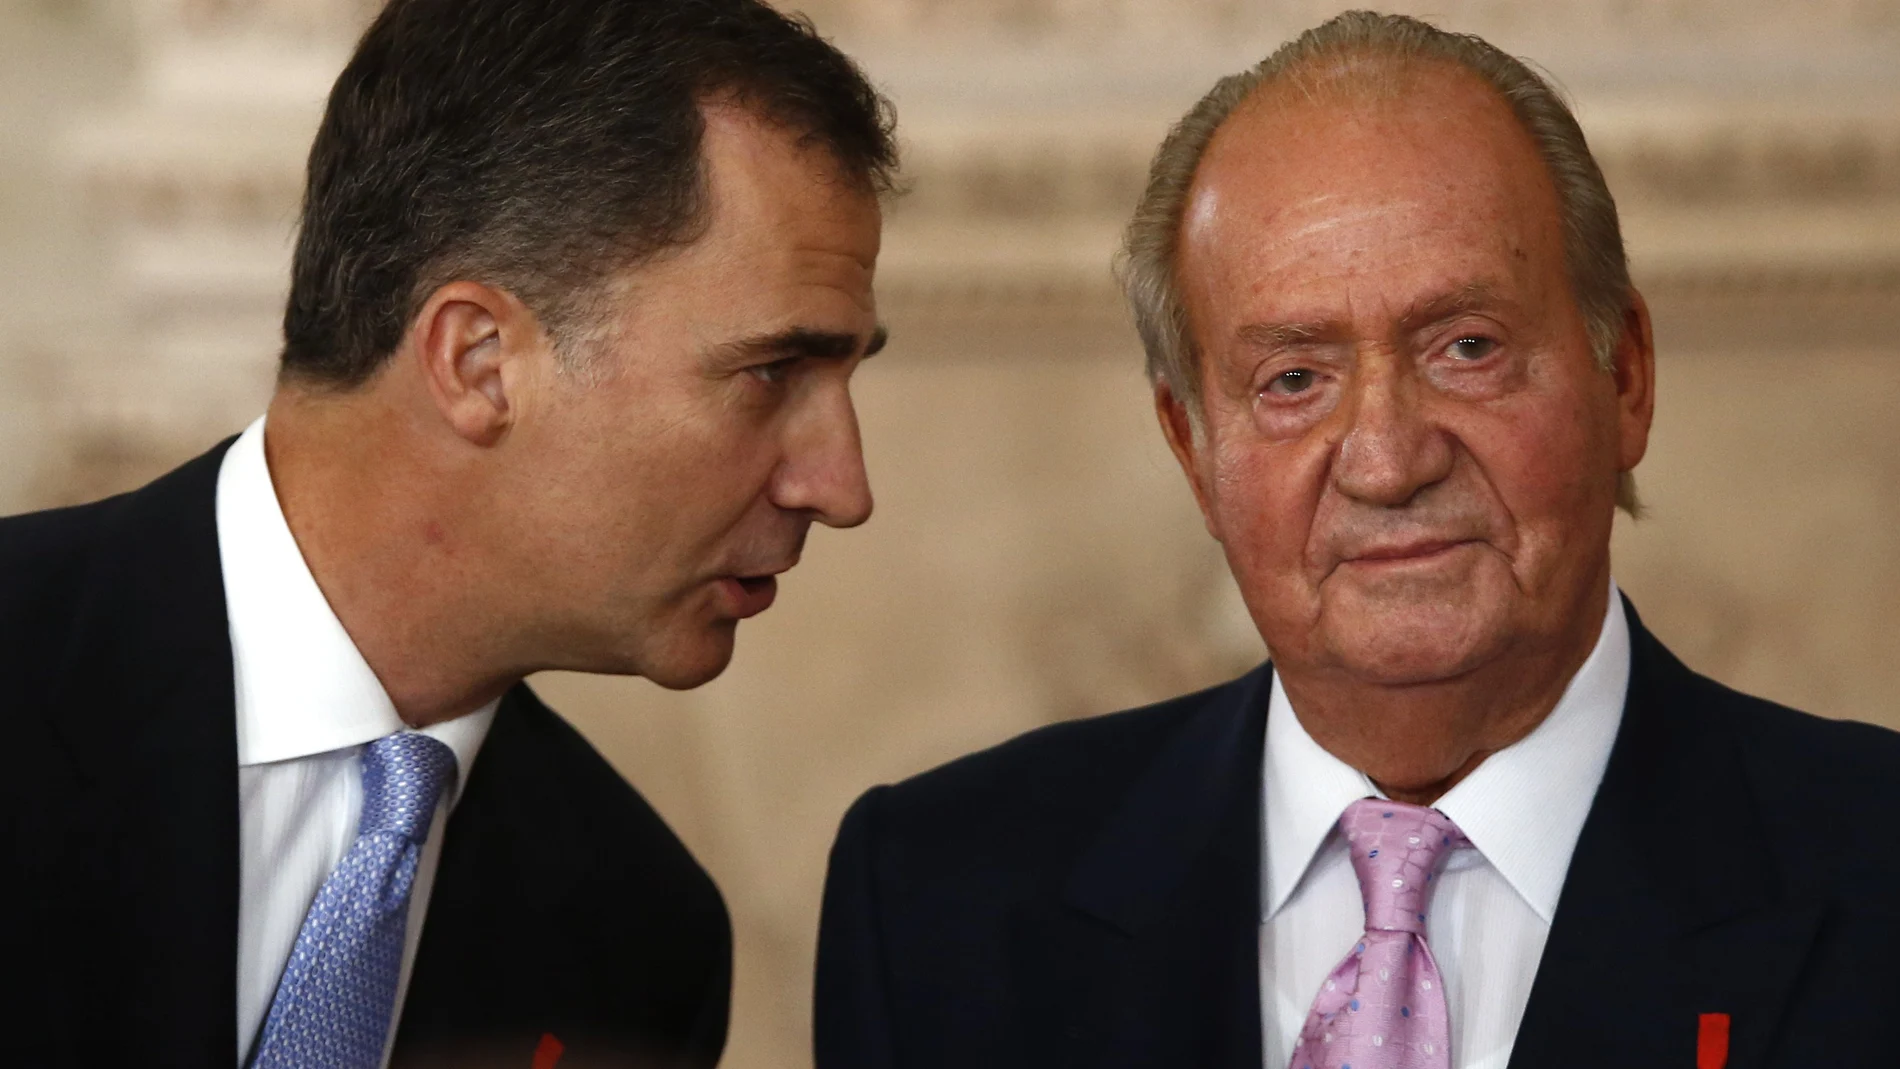 FILE - In this Wednesday June 18, 2014 file photo, Spanish Crown Prince Felipe, left speaks with Spanish King Juan Carlos after he signed an abdication law during a ceremony at the Royal Palace in Madrid, Spain. Former Spanish King Juan Carlos I has paid close to 4.4 million euros ($5.33 million) in a debt with the countryâ€™s tax authorities it was announced Friday, Feb. 26, 2021, his latest attempt to regularize past undeclared income. The former monarch has been living abroad for more than half a year after media revealed fresh allegations of financial misdoings. (AP Photo/Daniel Ochoa de Olza)